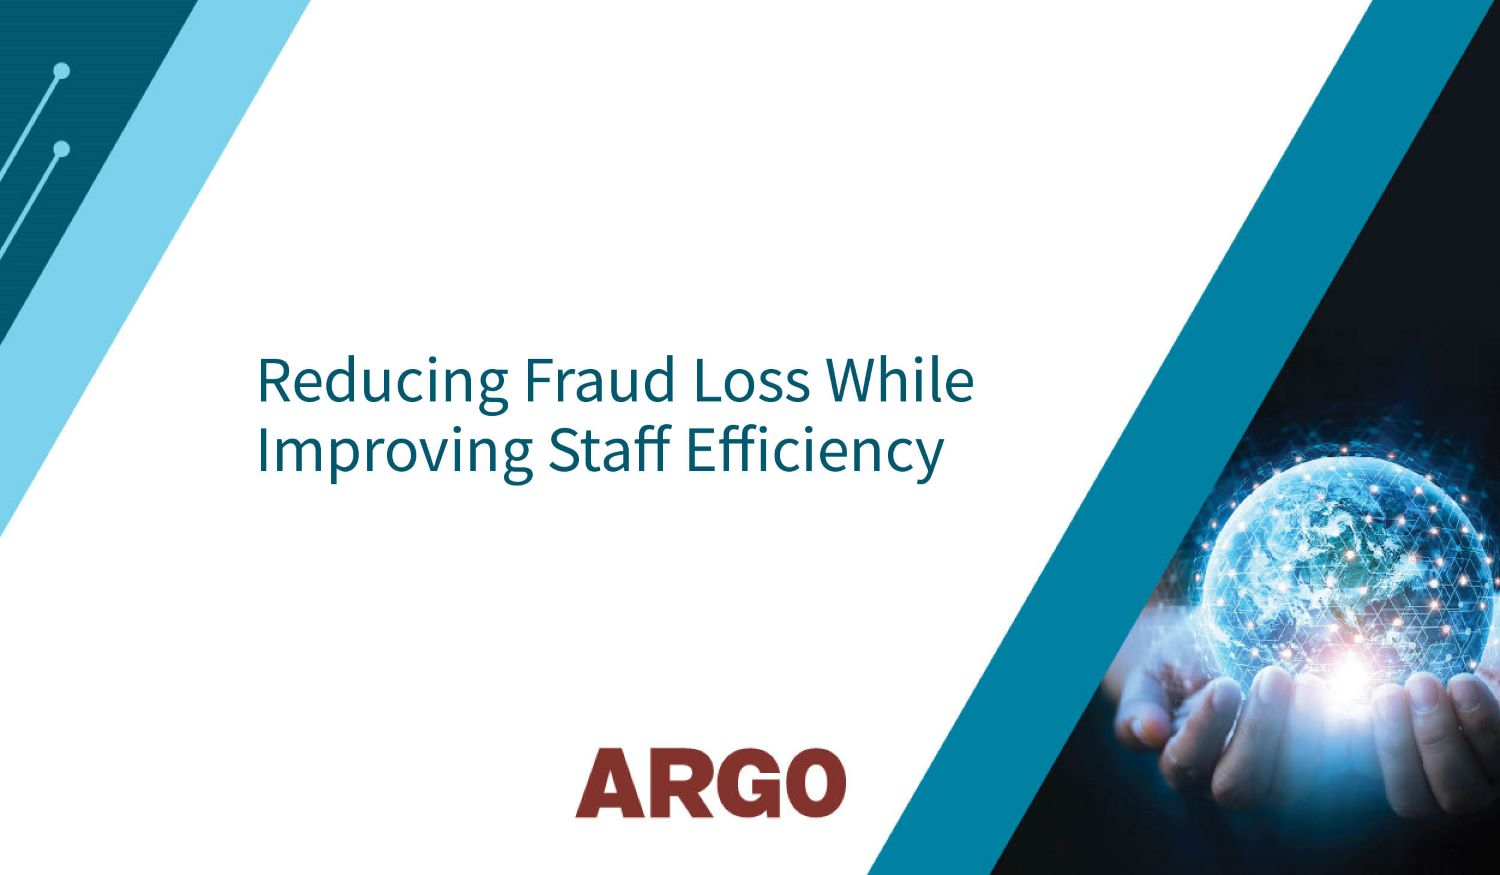 Reducing Fraud Loss While Improving Staff Efficiency